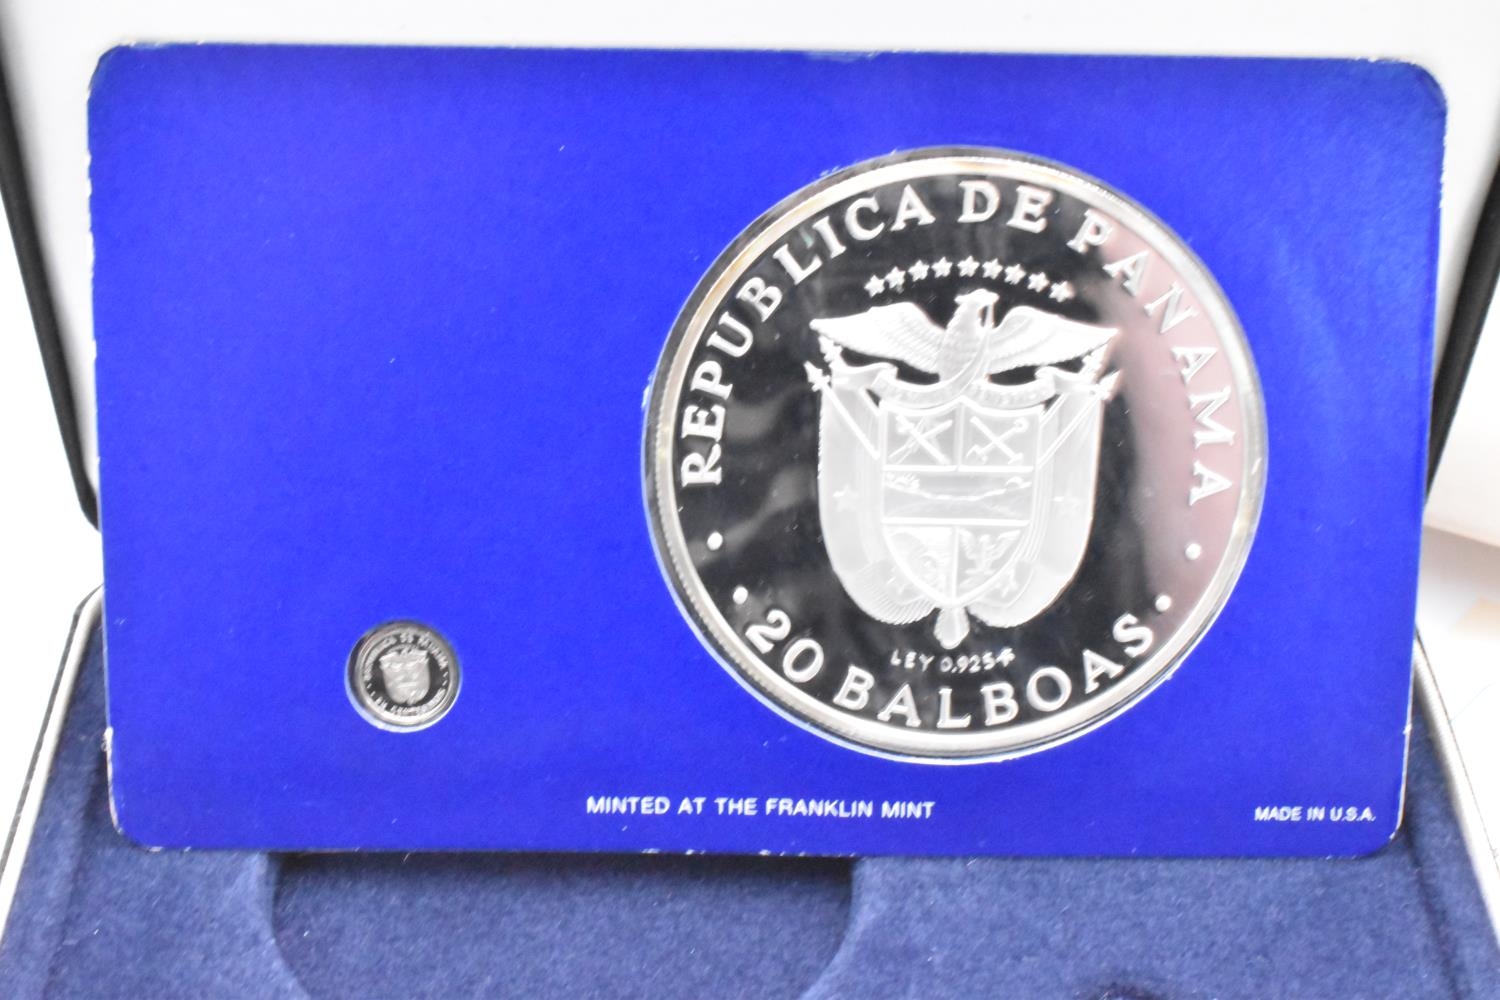 Republic of Panama - 1976 Coinage of Panama, comprising of Silver 20 Balboas depicting the - Image 3 of 3